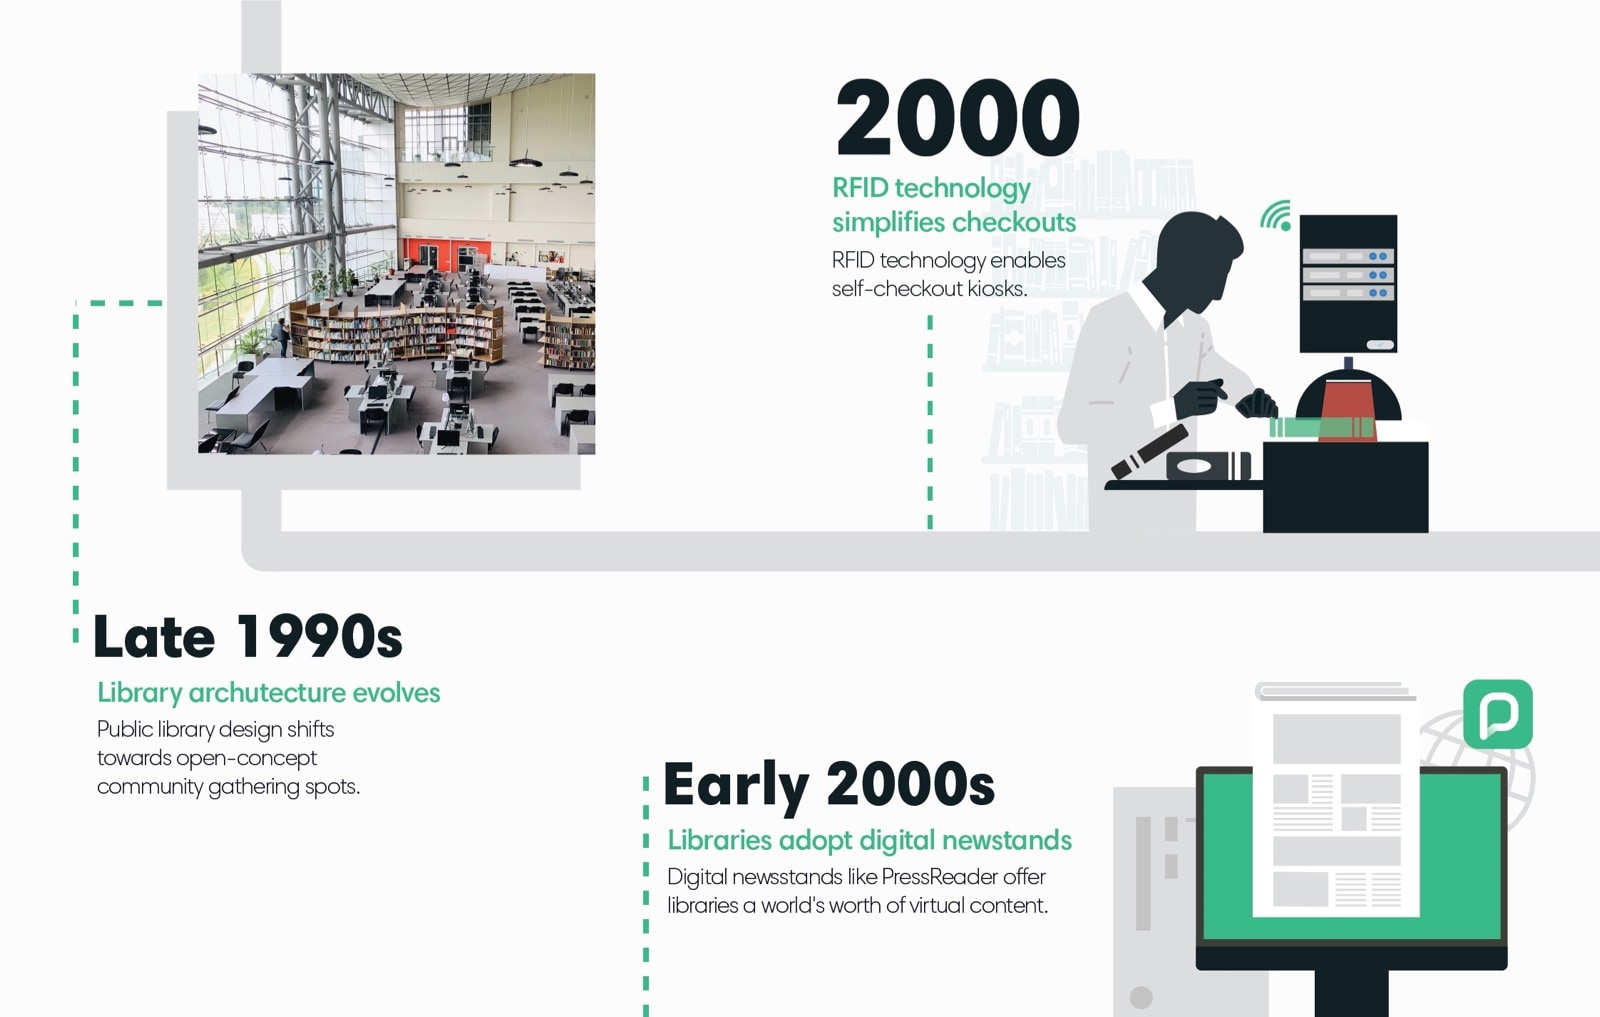 The evolution of public libraries since 7th century BCE (infographic)